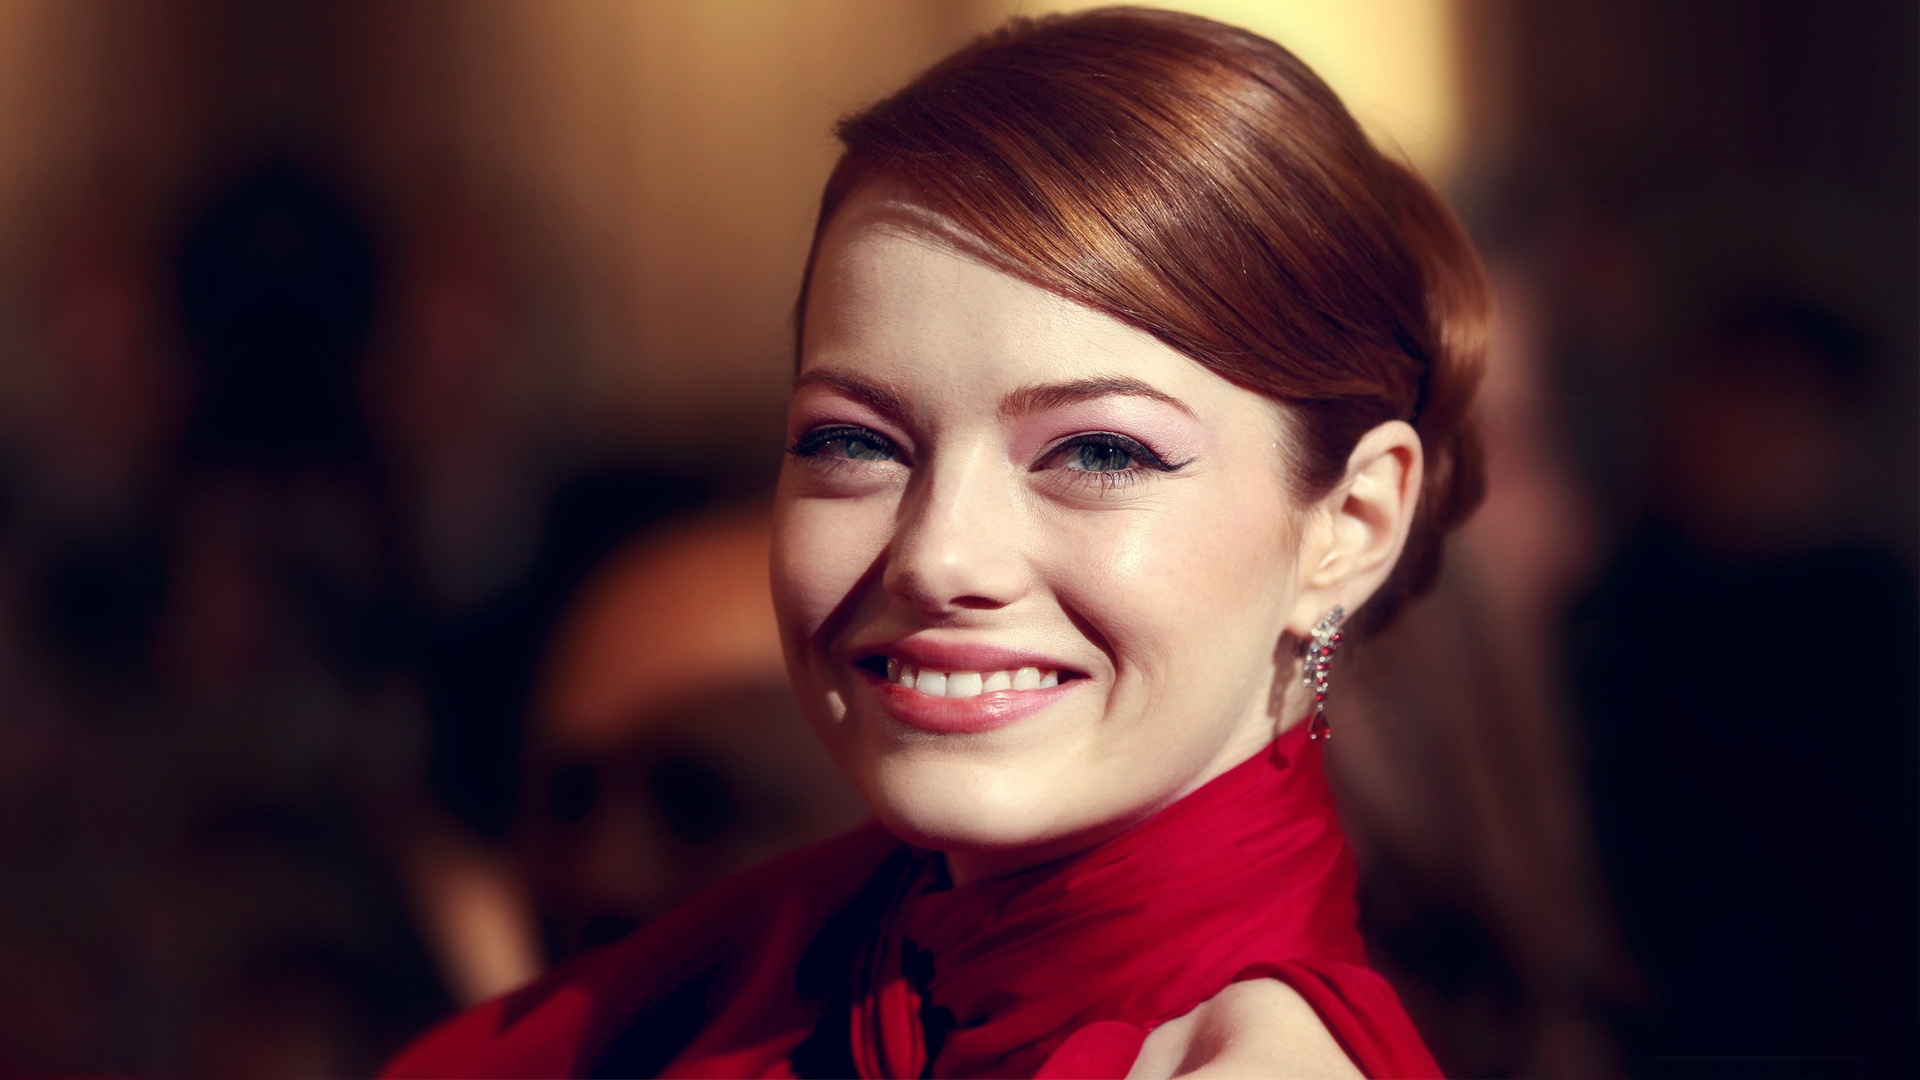 Beautiful Smile At The 84th Academy Awards 1920x1080 HD Wallpaper